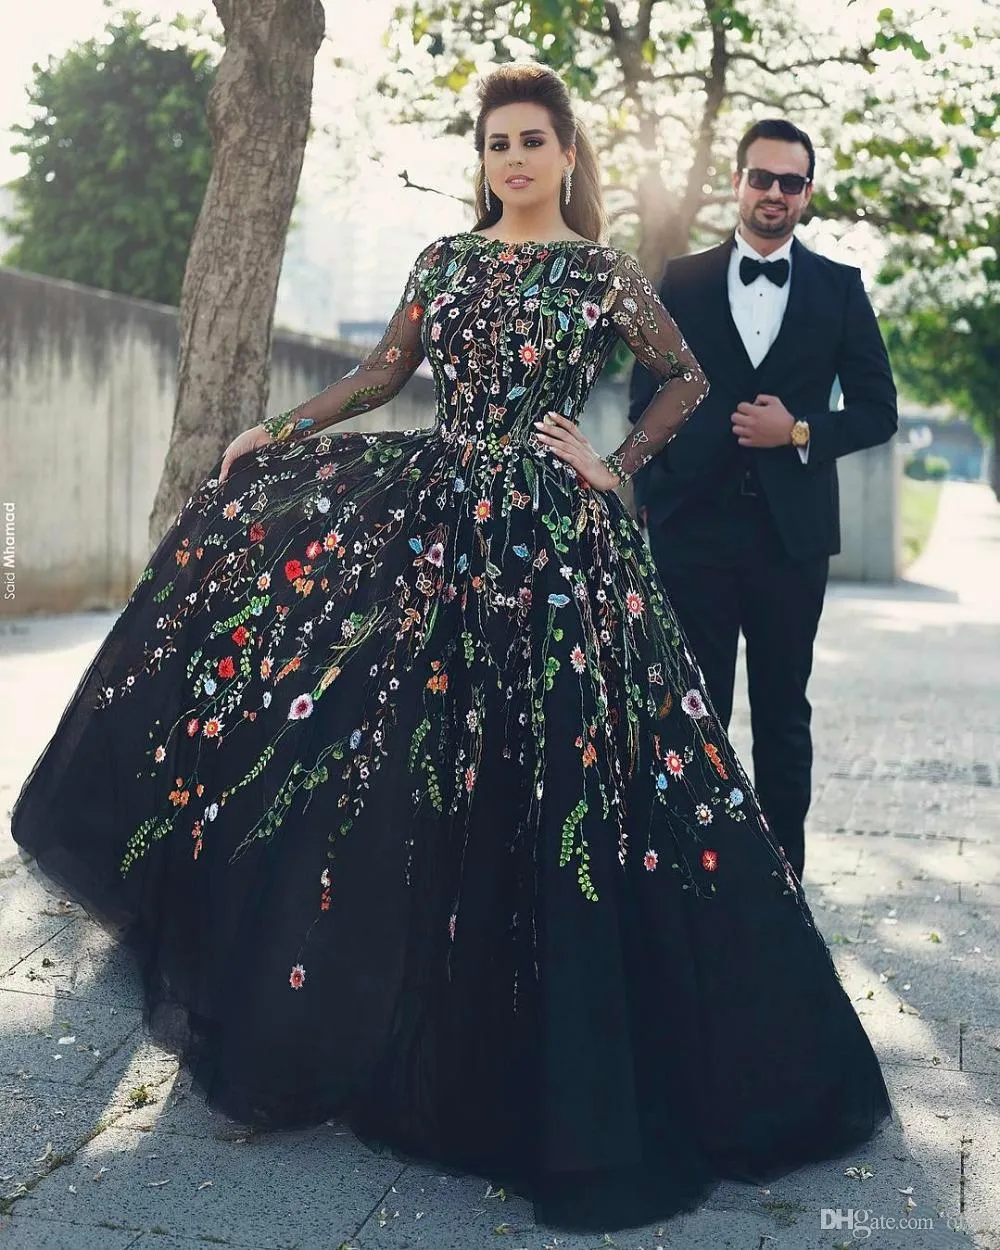 Arabic Dubai Floral Lace Black Floral Prom Dress With Sweep Train, Backless  Illusion, And Long Sleeves Perfect For Engagement, Formal Evening Events,  Womens Gowns From Sexybride, $122.22